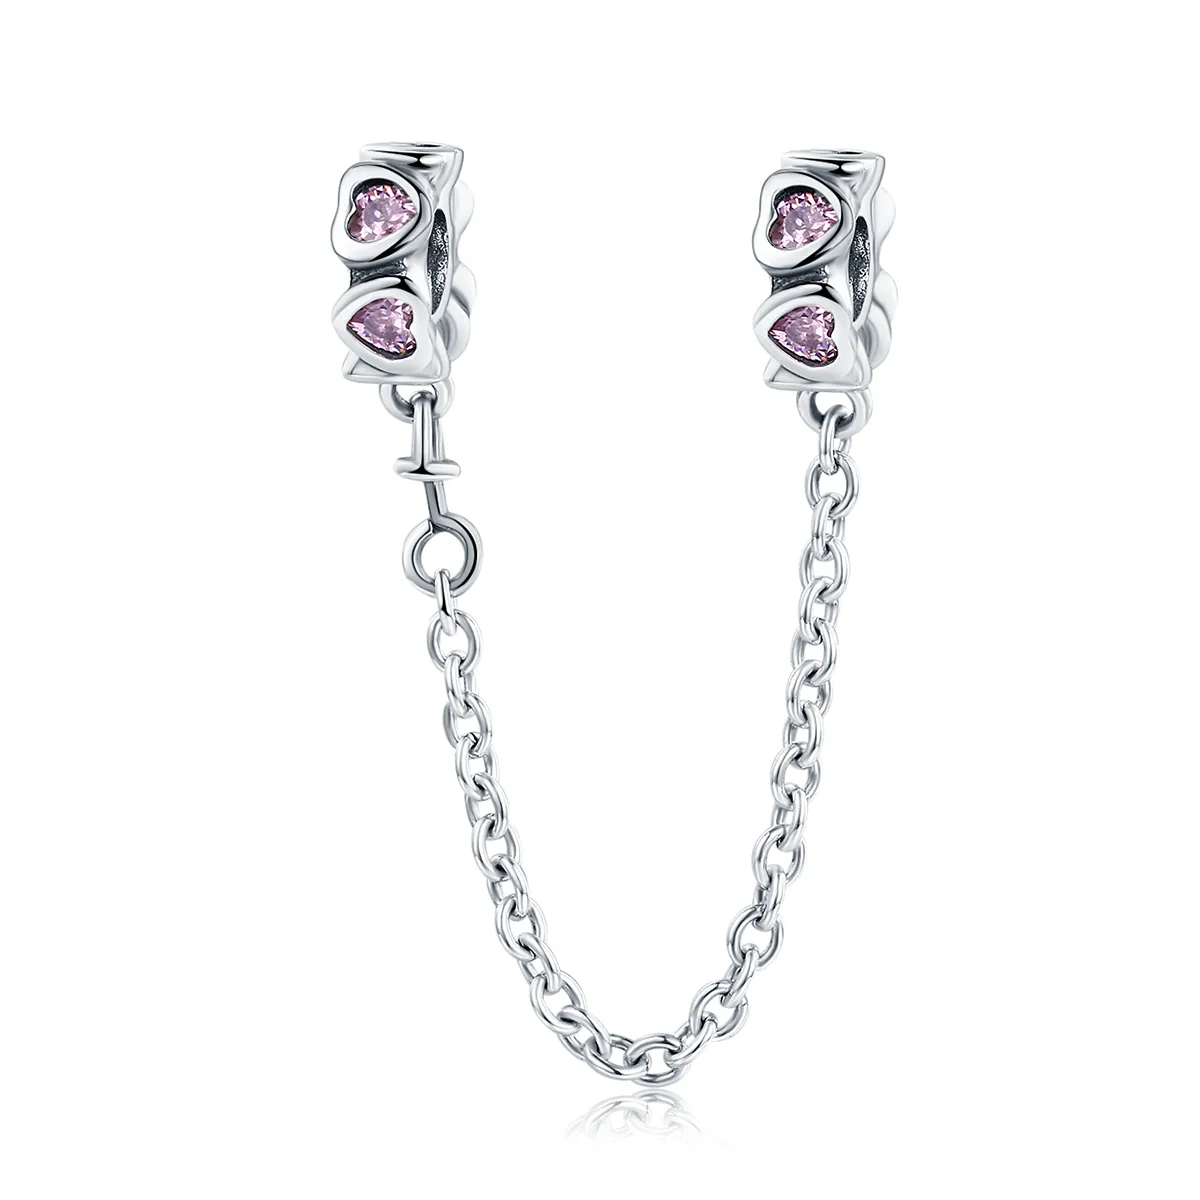 Pandora Style Silver Fragrant Heart Safety Chain - SCC562